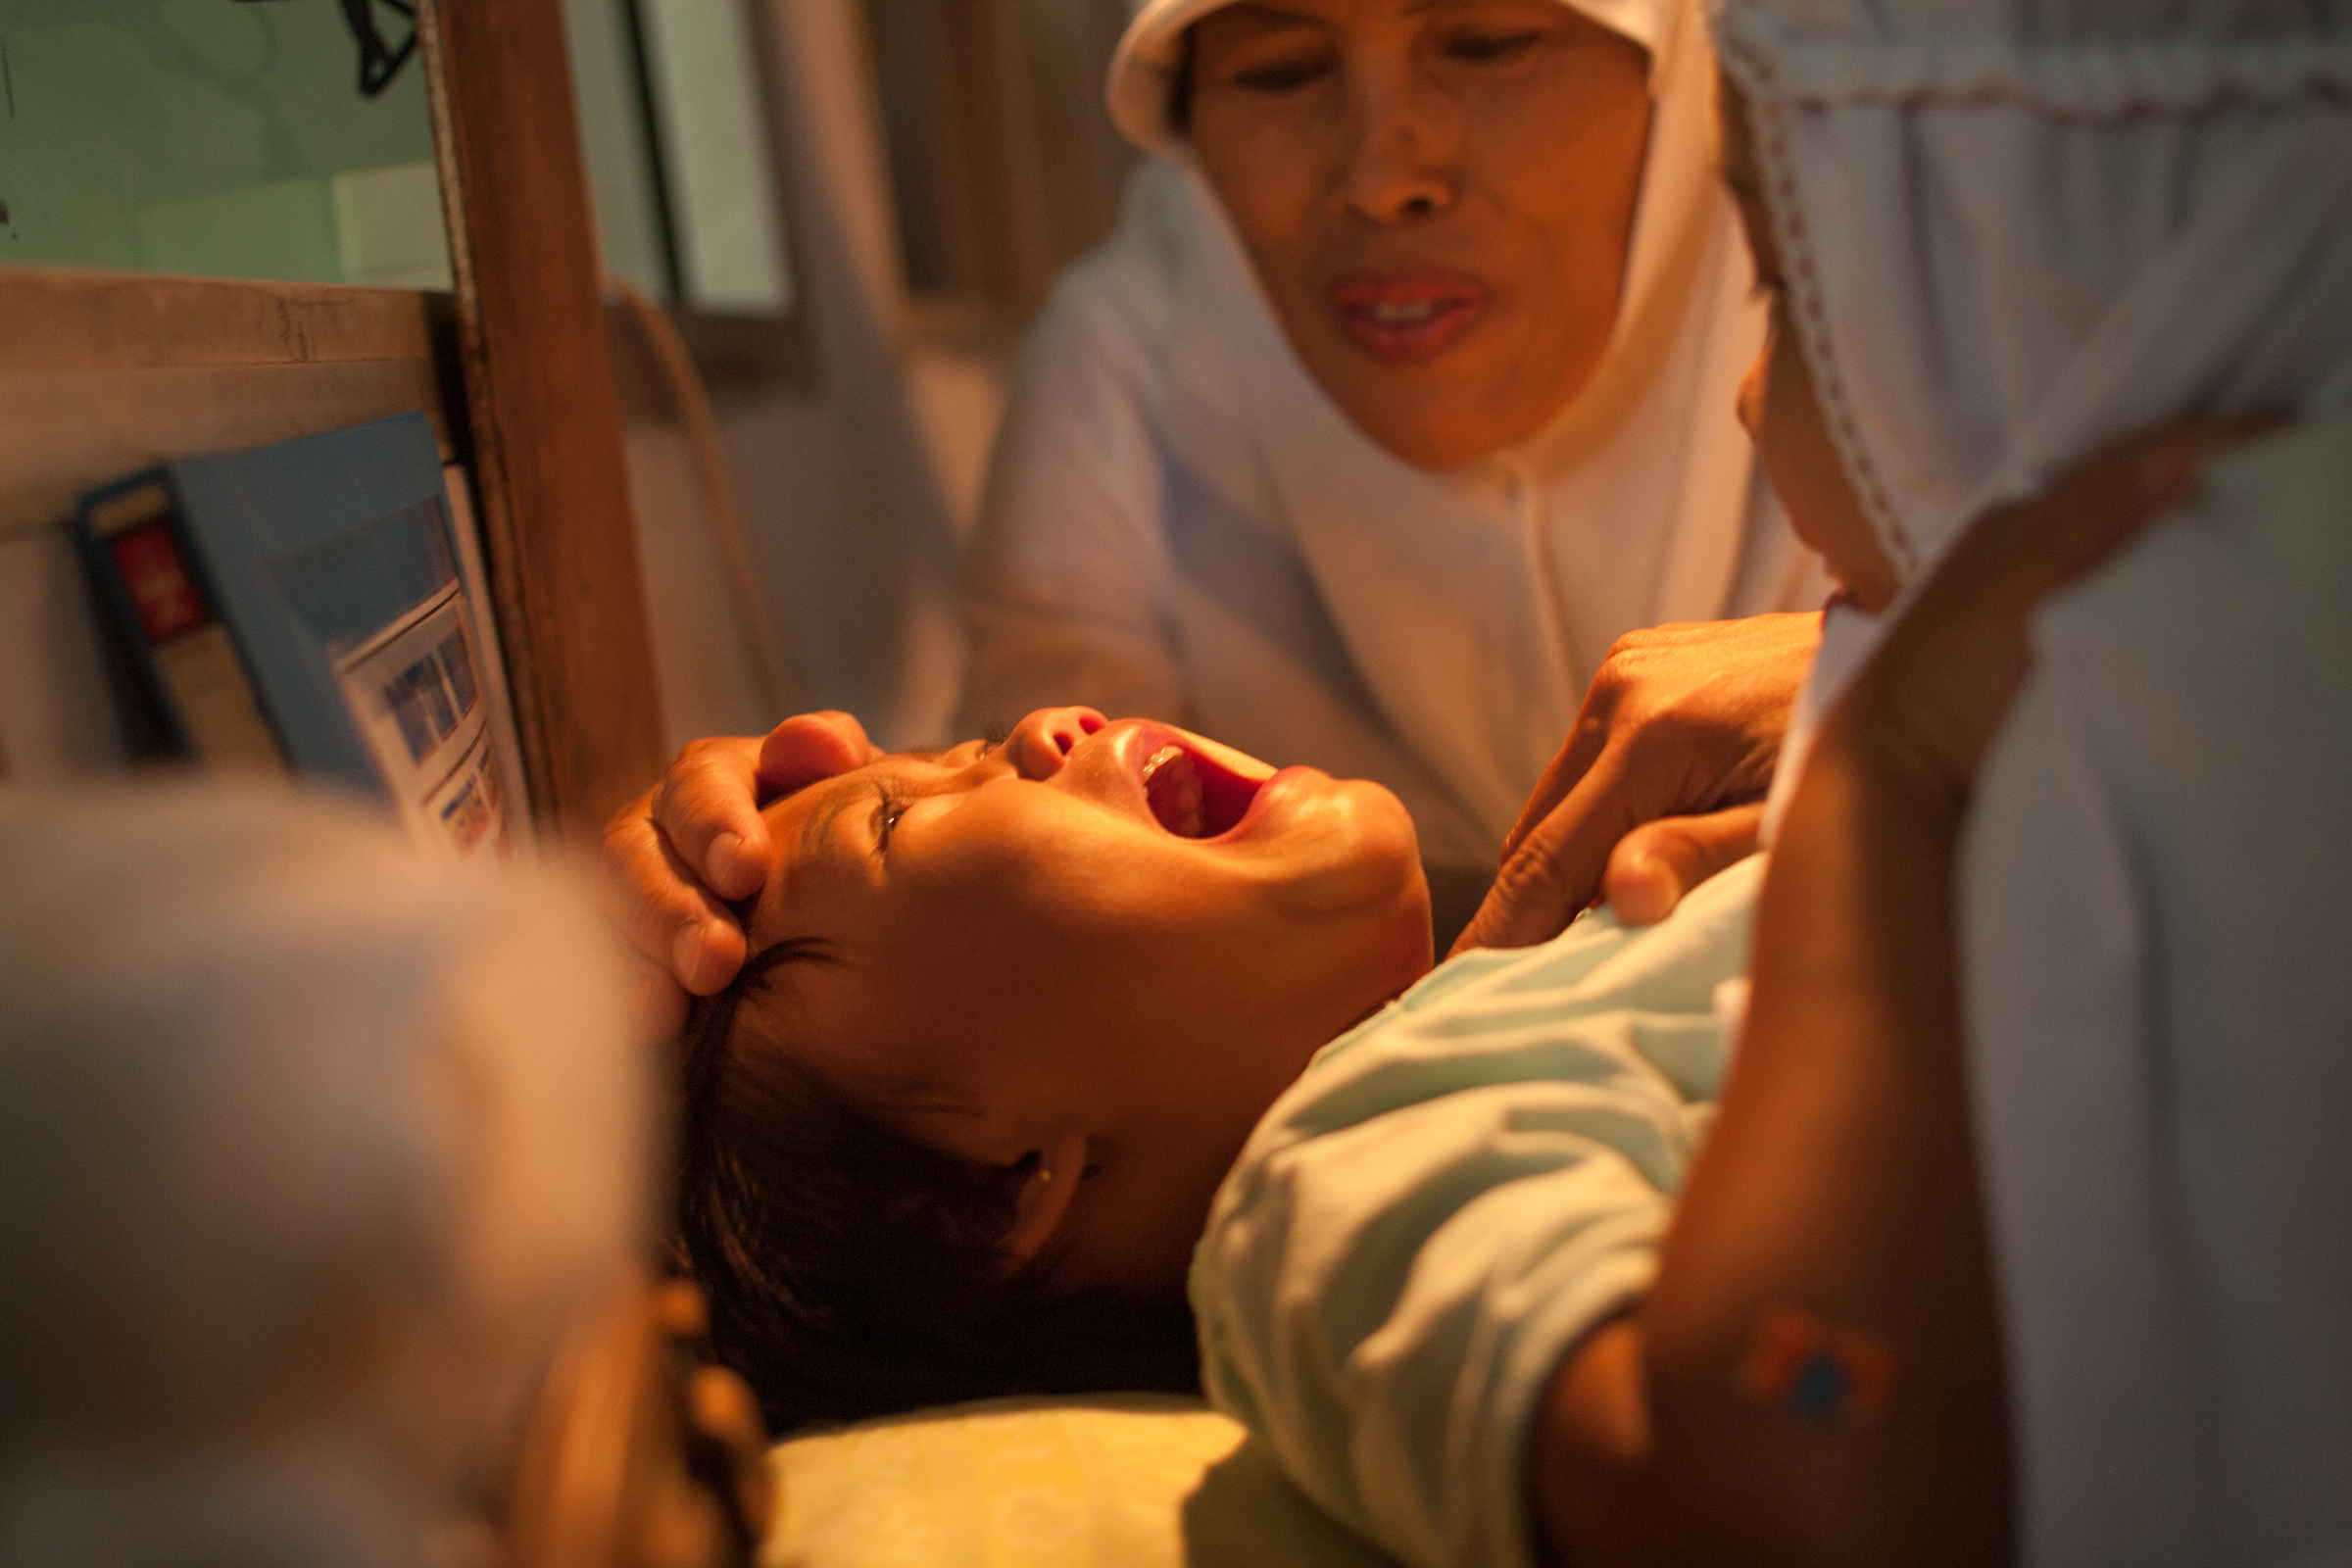 A young girl cries while being circumcised in Bandung, Indonesia.